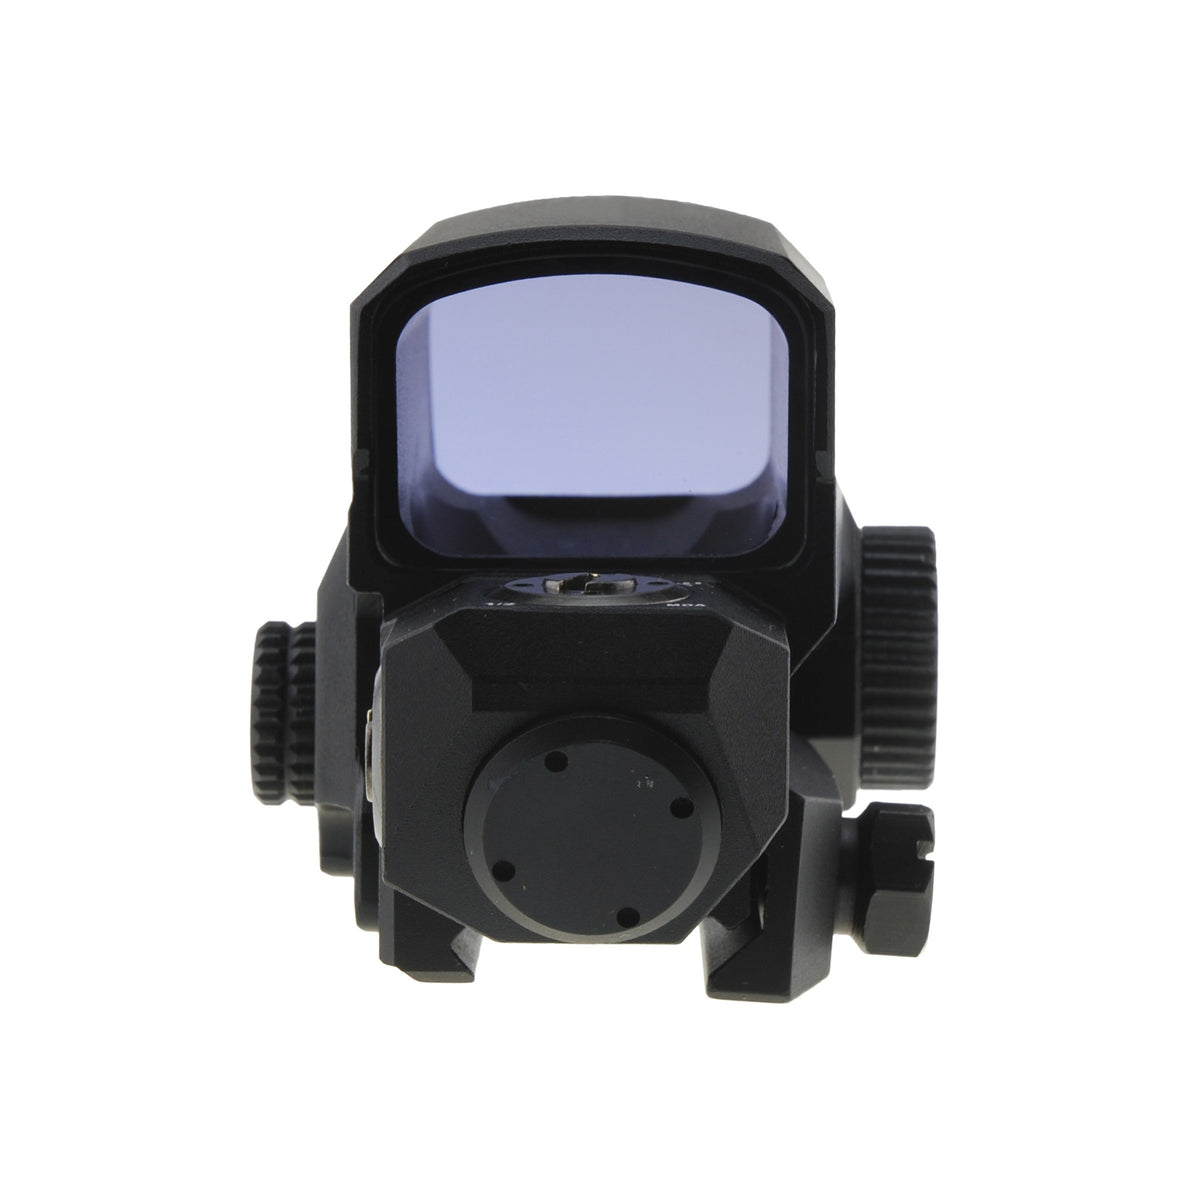 LCO Red - Green Dot Sight